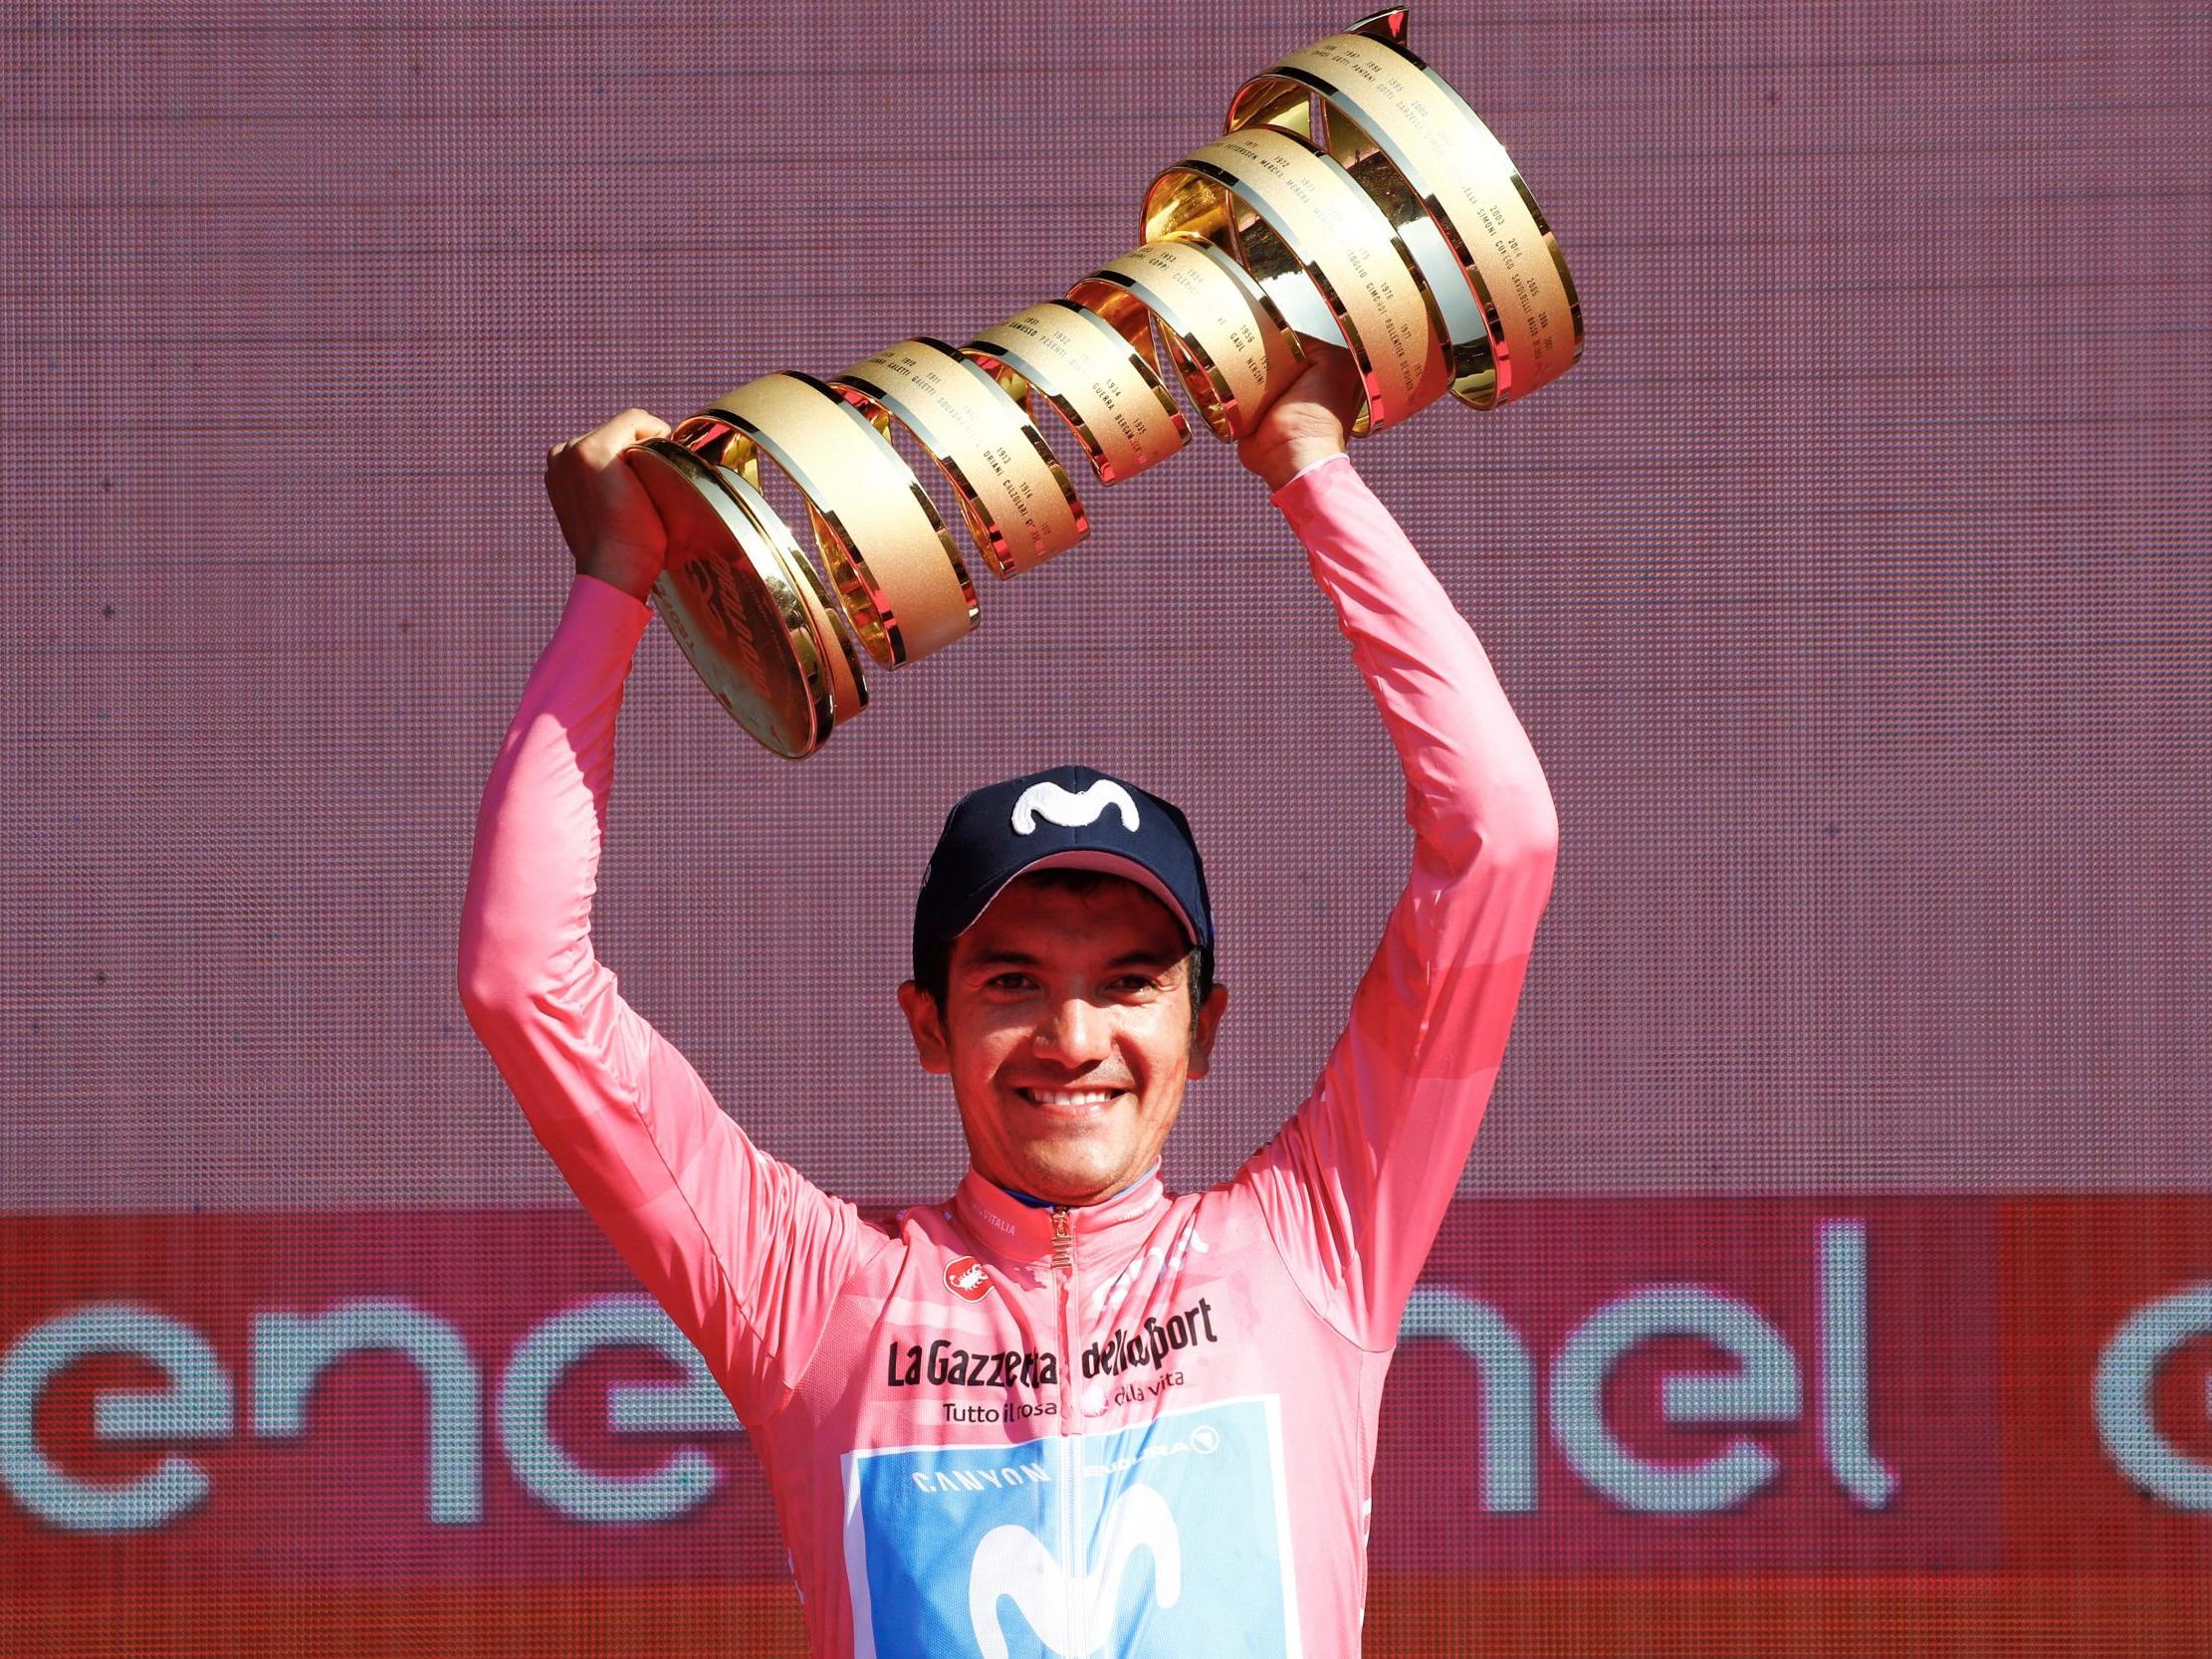 Richard Carapaz lifts the trophy after winning the general classification